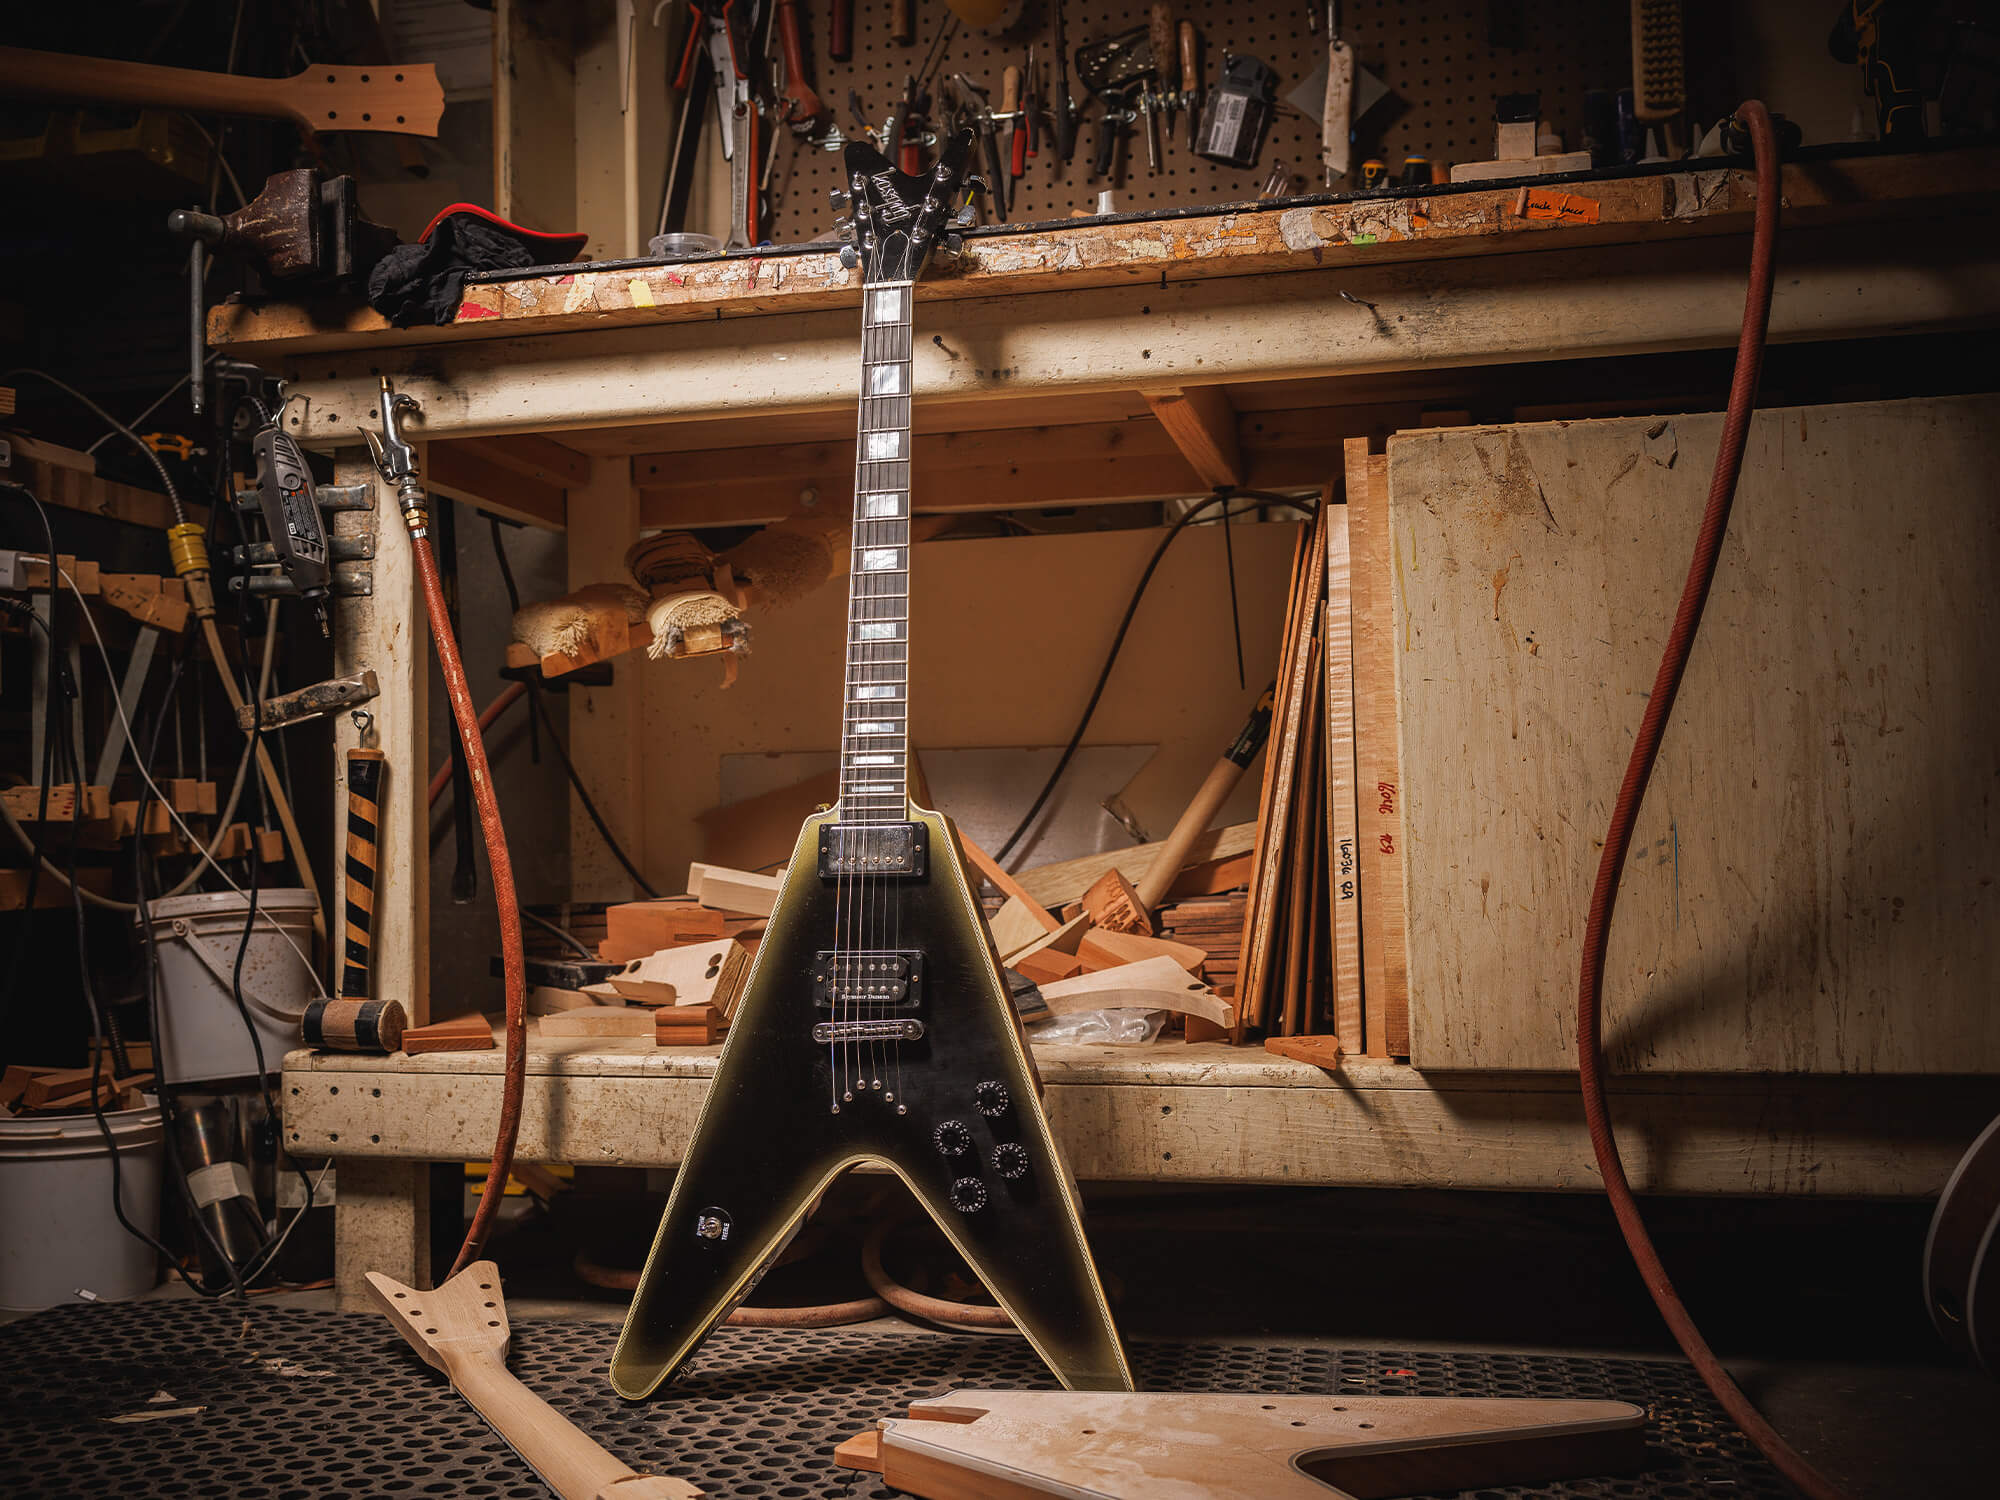 The Adam Jones Flying V. It is in a workshop environment, leaning against a workbench. It is a V-shaped electric guitar that looks rustic and has a dark body with golden edges.